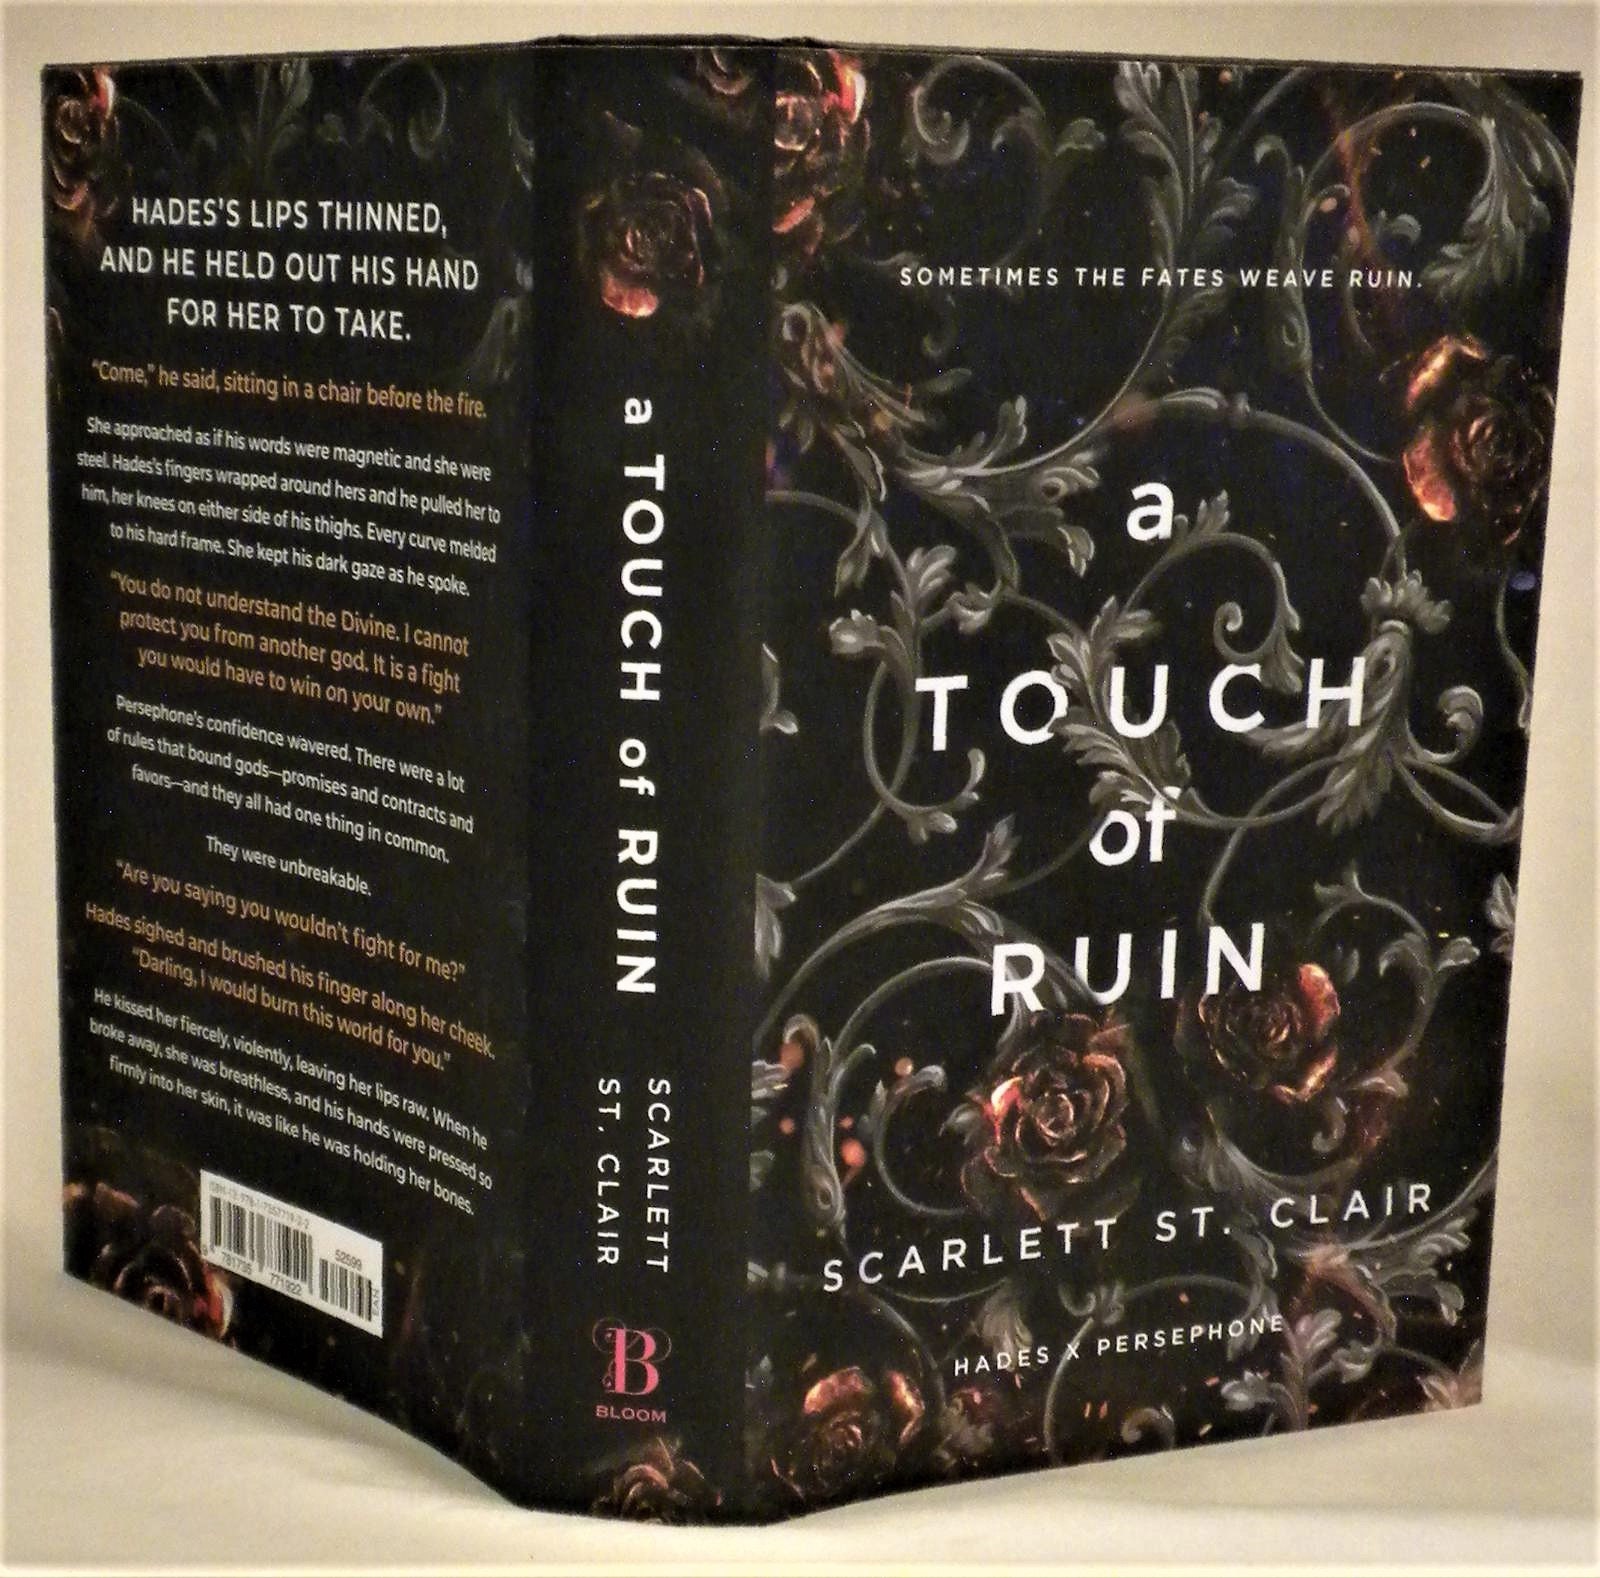 A Touch of Ruin (Hades X Persephone, 2)